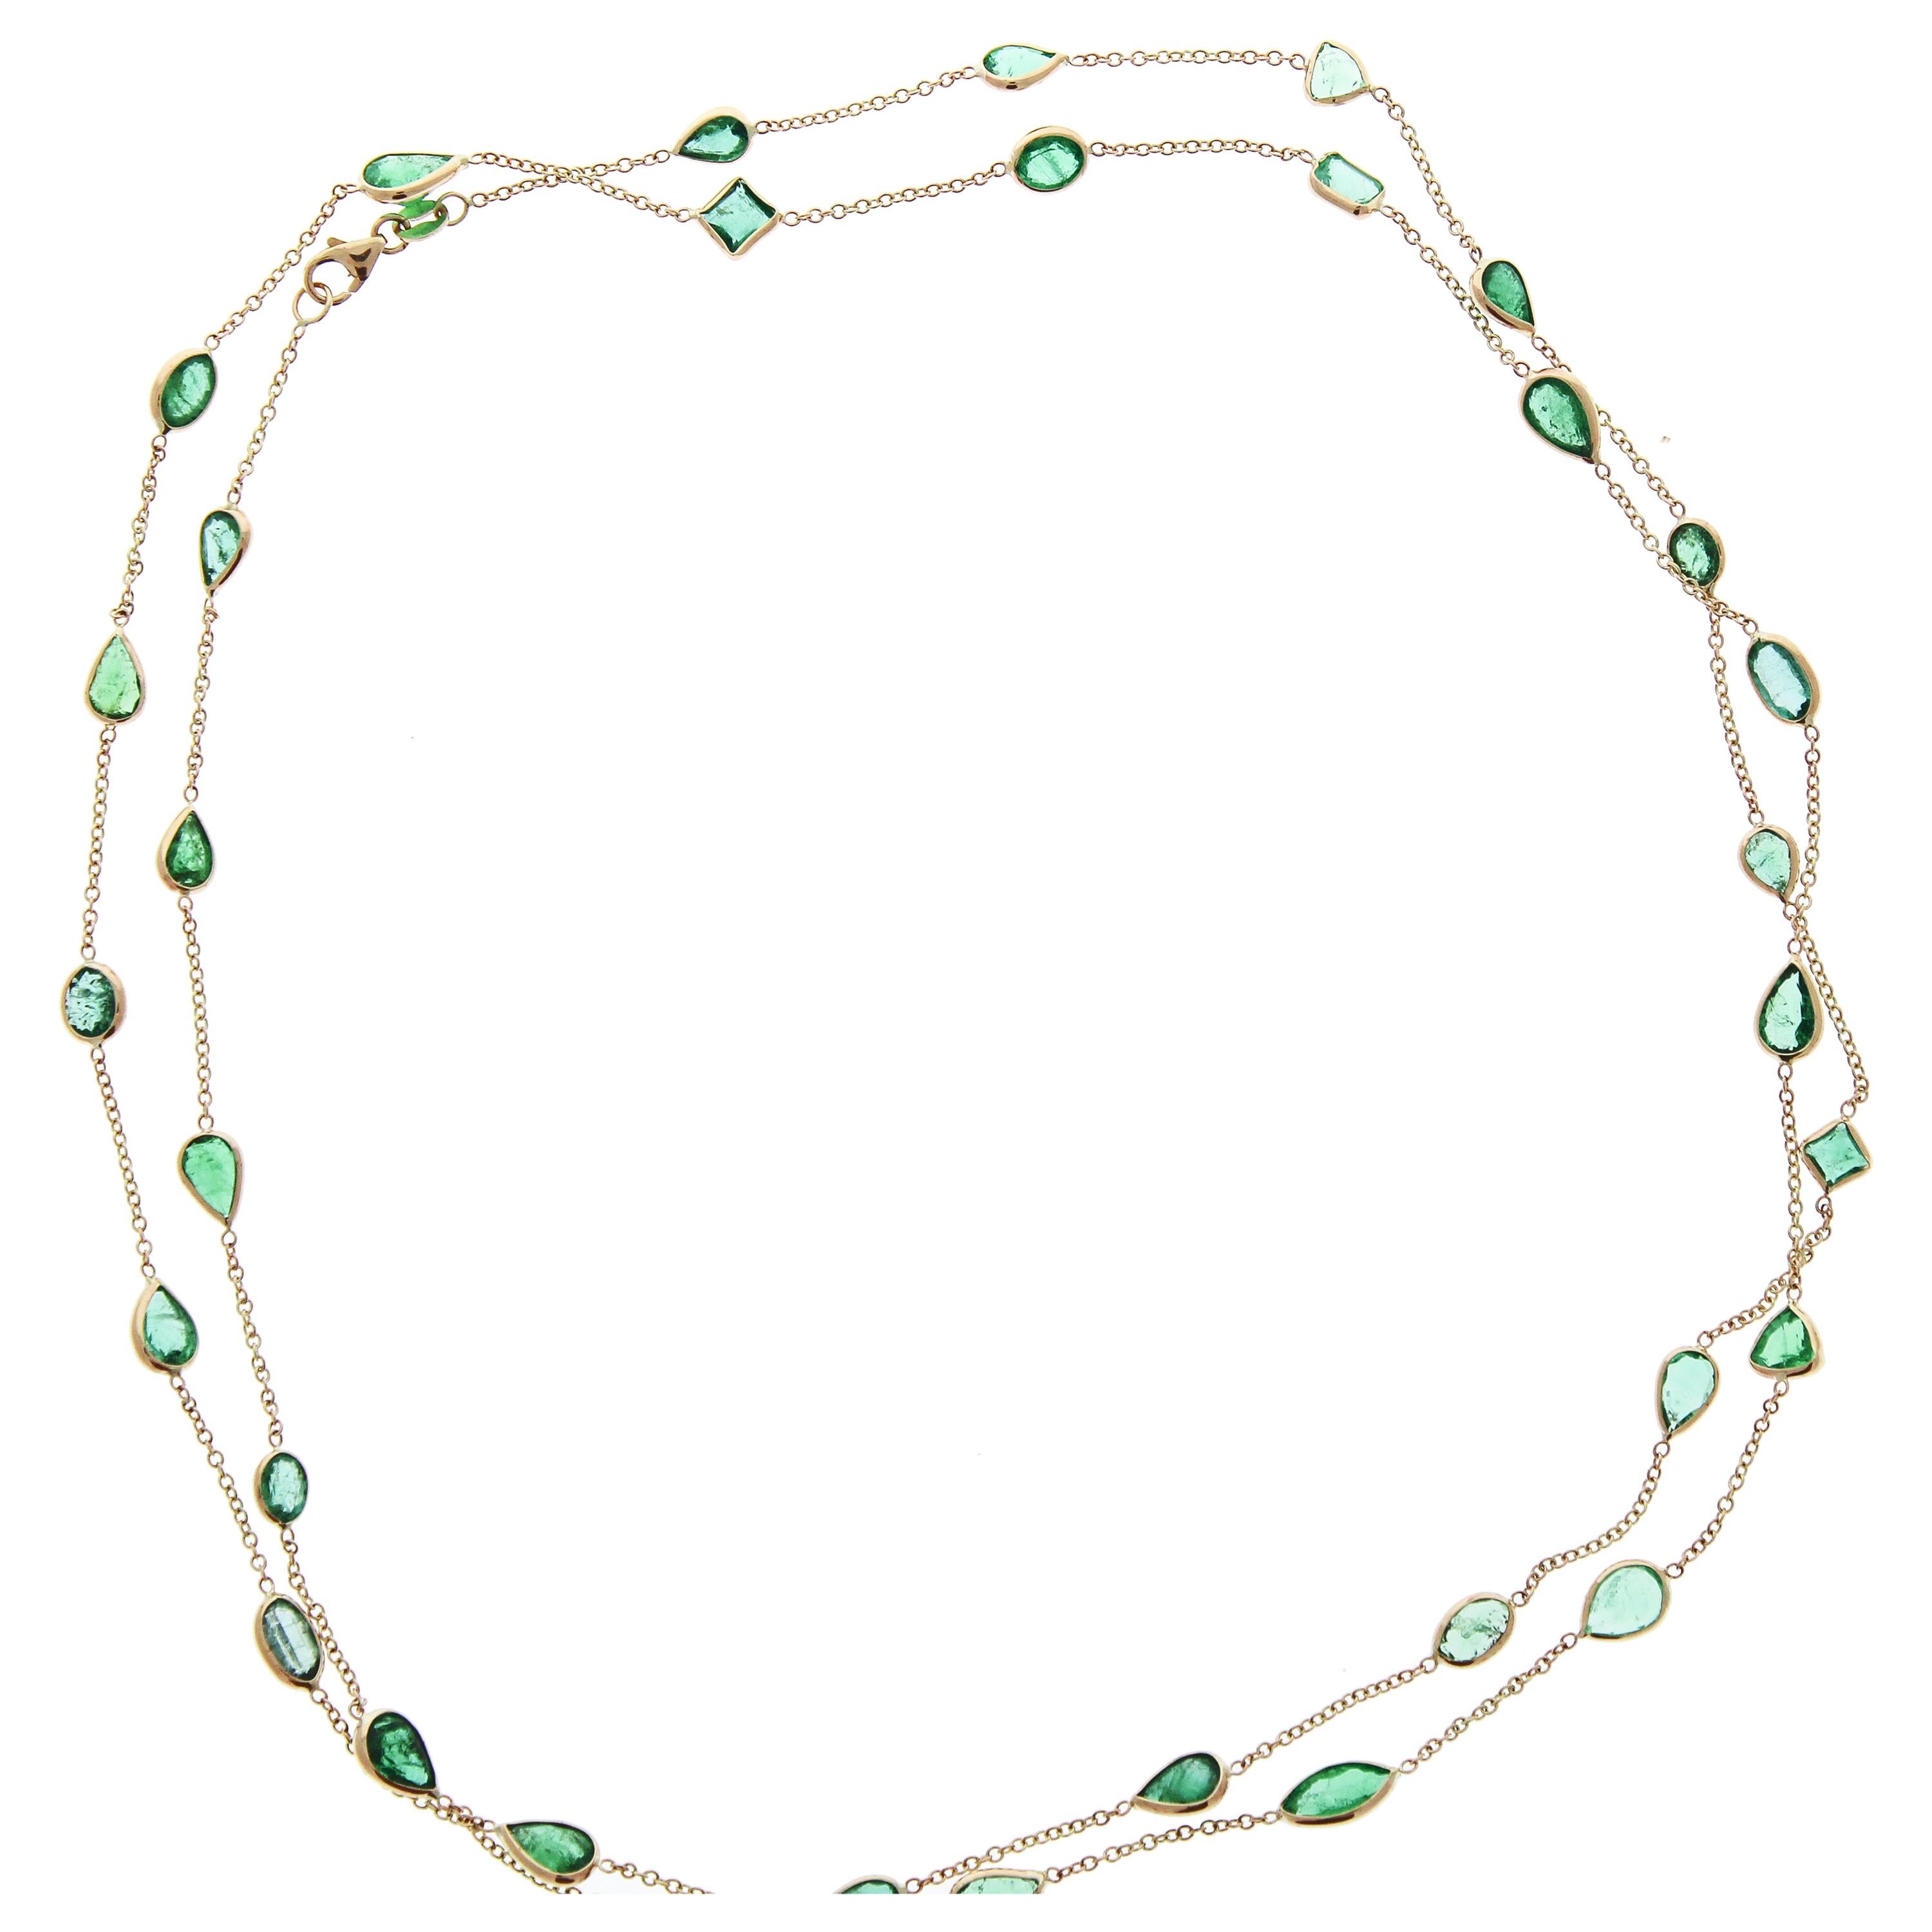 14.22 Carat Mixed Cut Emerald Necklace in 14K Yellow Gold